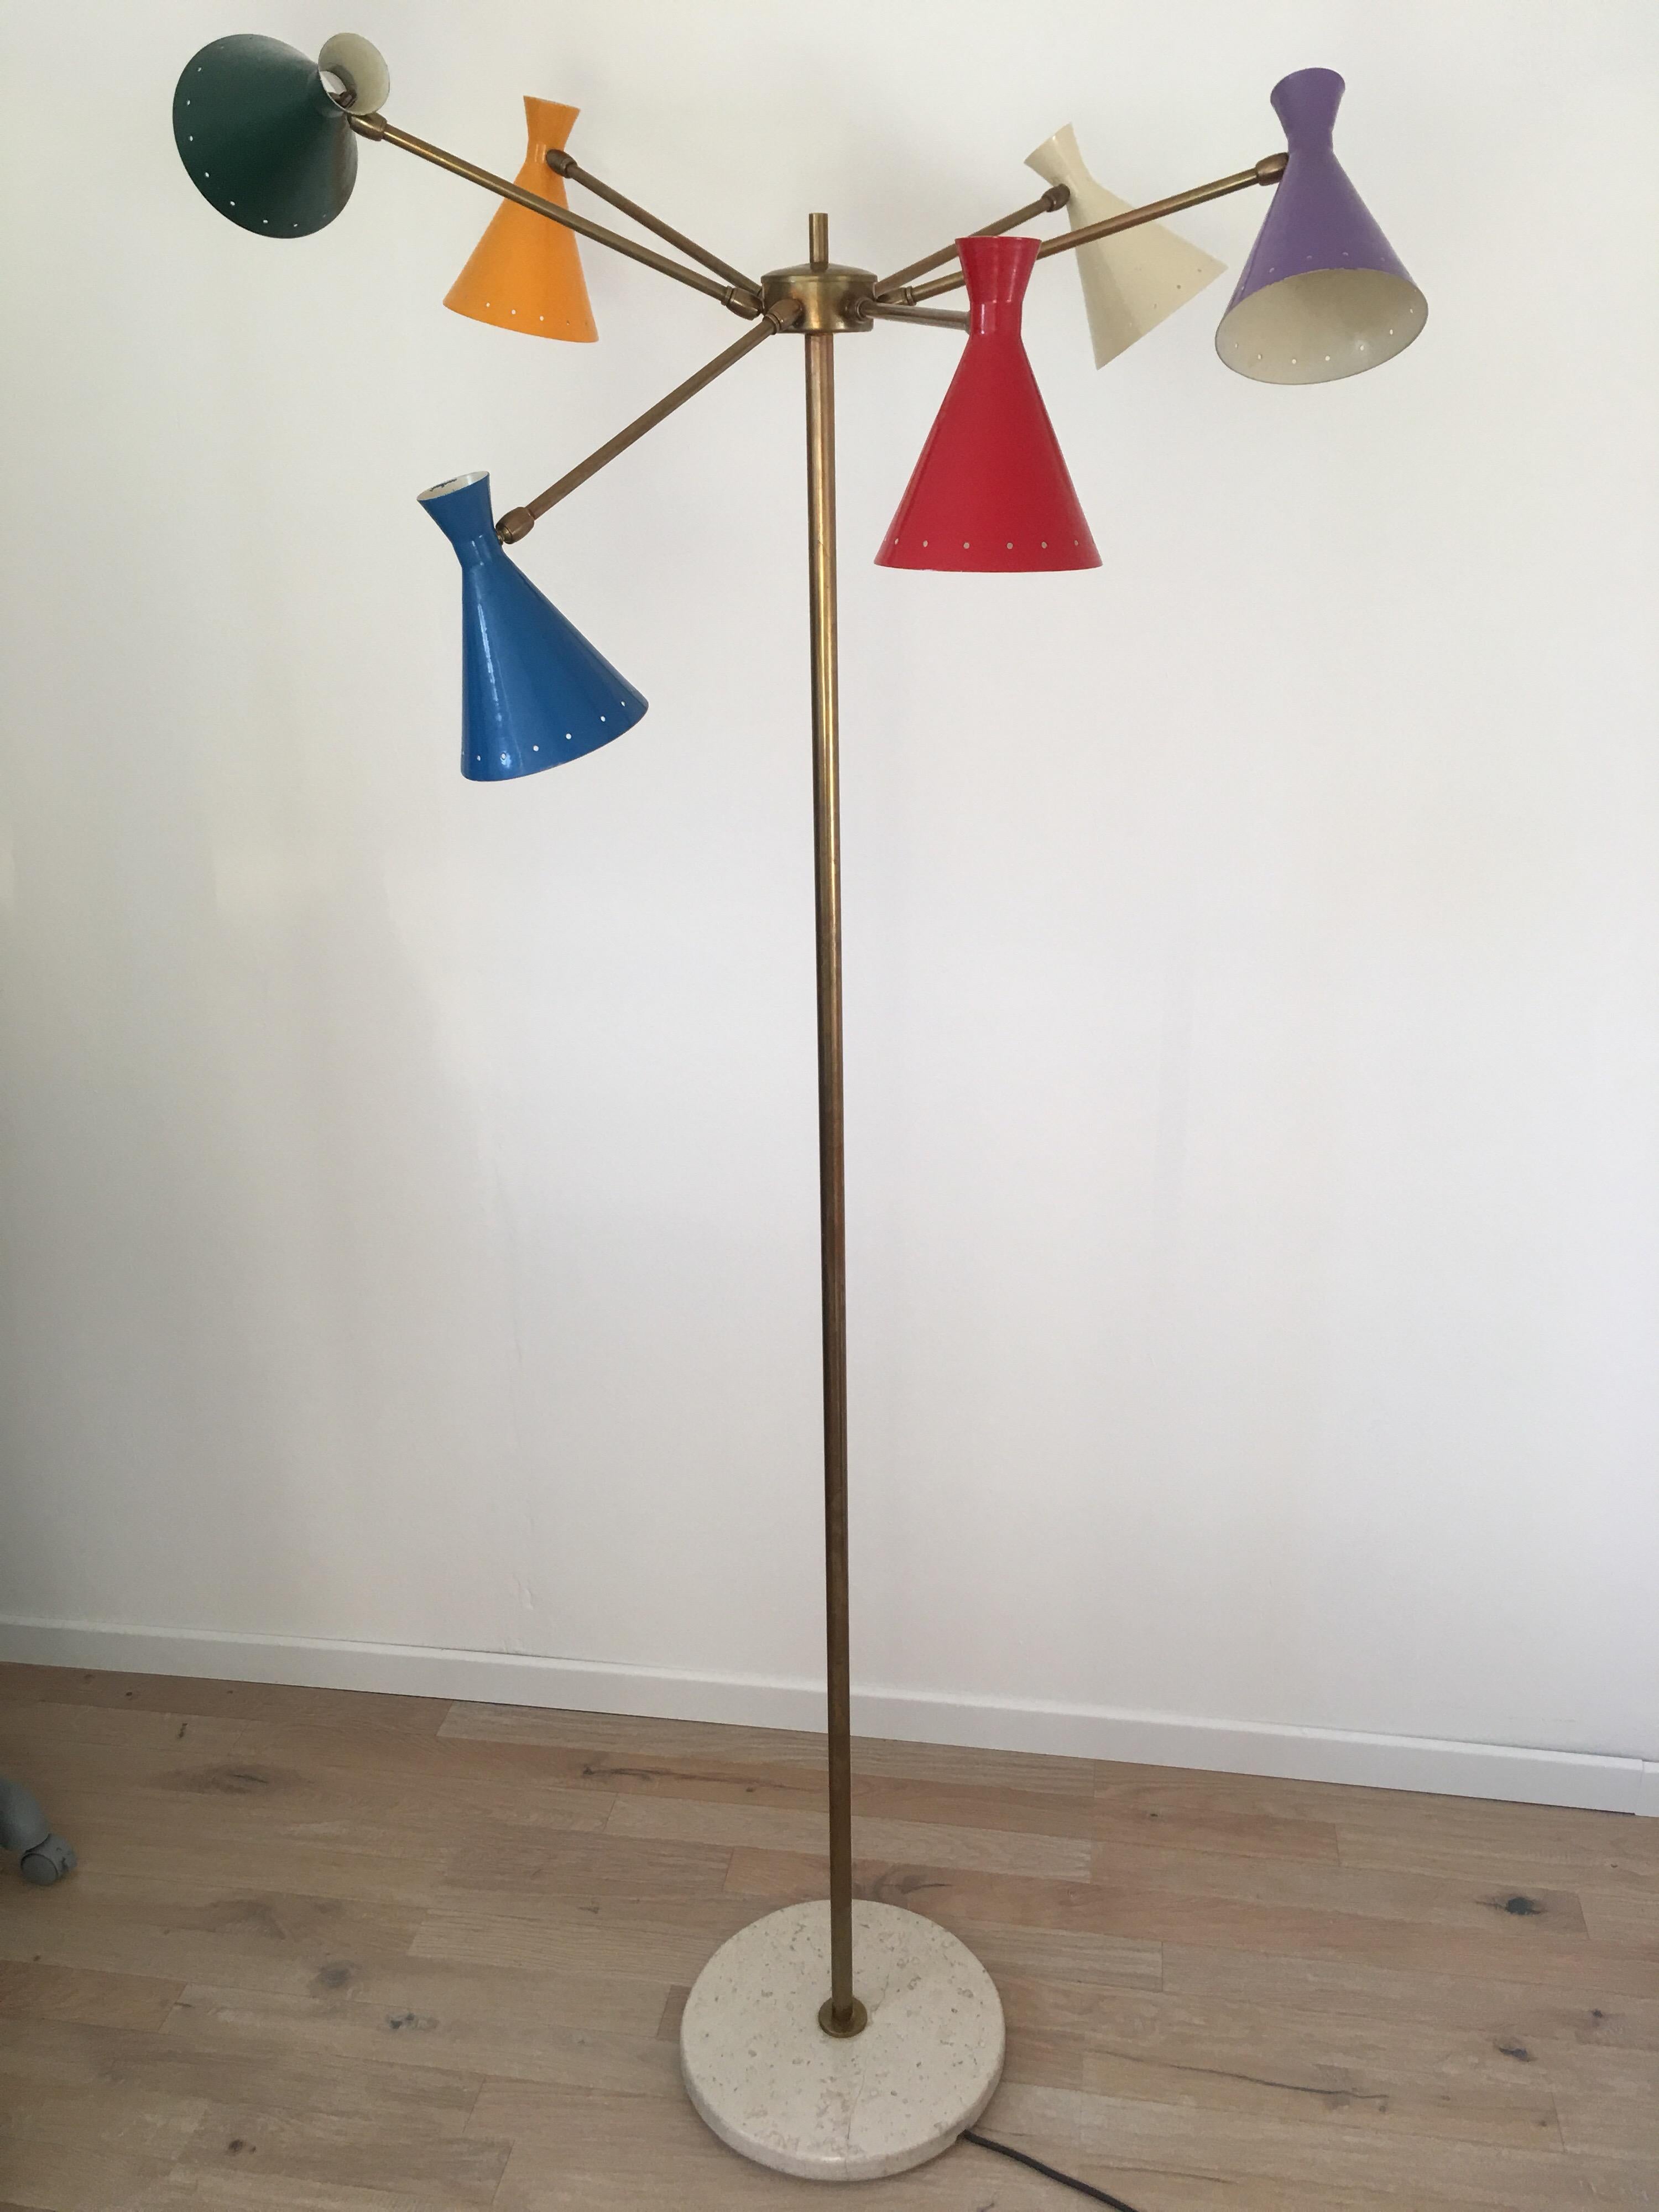 Rare marble and brass floor lamp designed by Stinovo in 1960s.
Each painted metal lampshade and each brass arm is adjustable thanks to a ball joint system. This ingenious system allows multiple lighting positions.
In very good condition, vintage